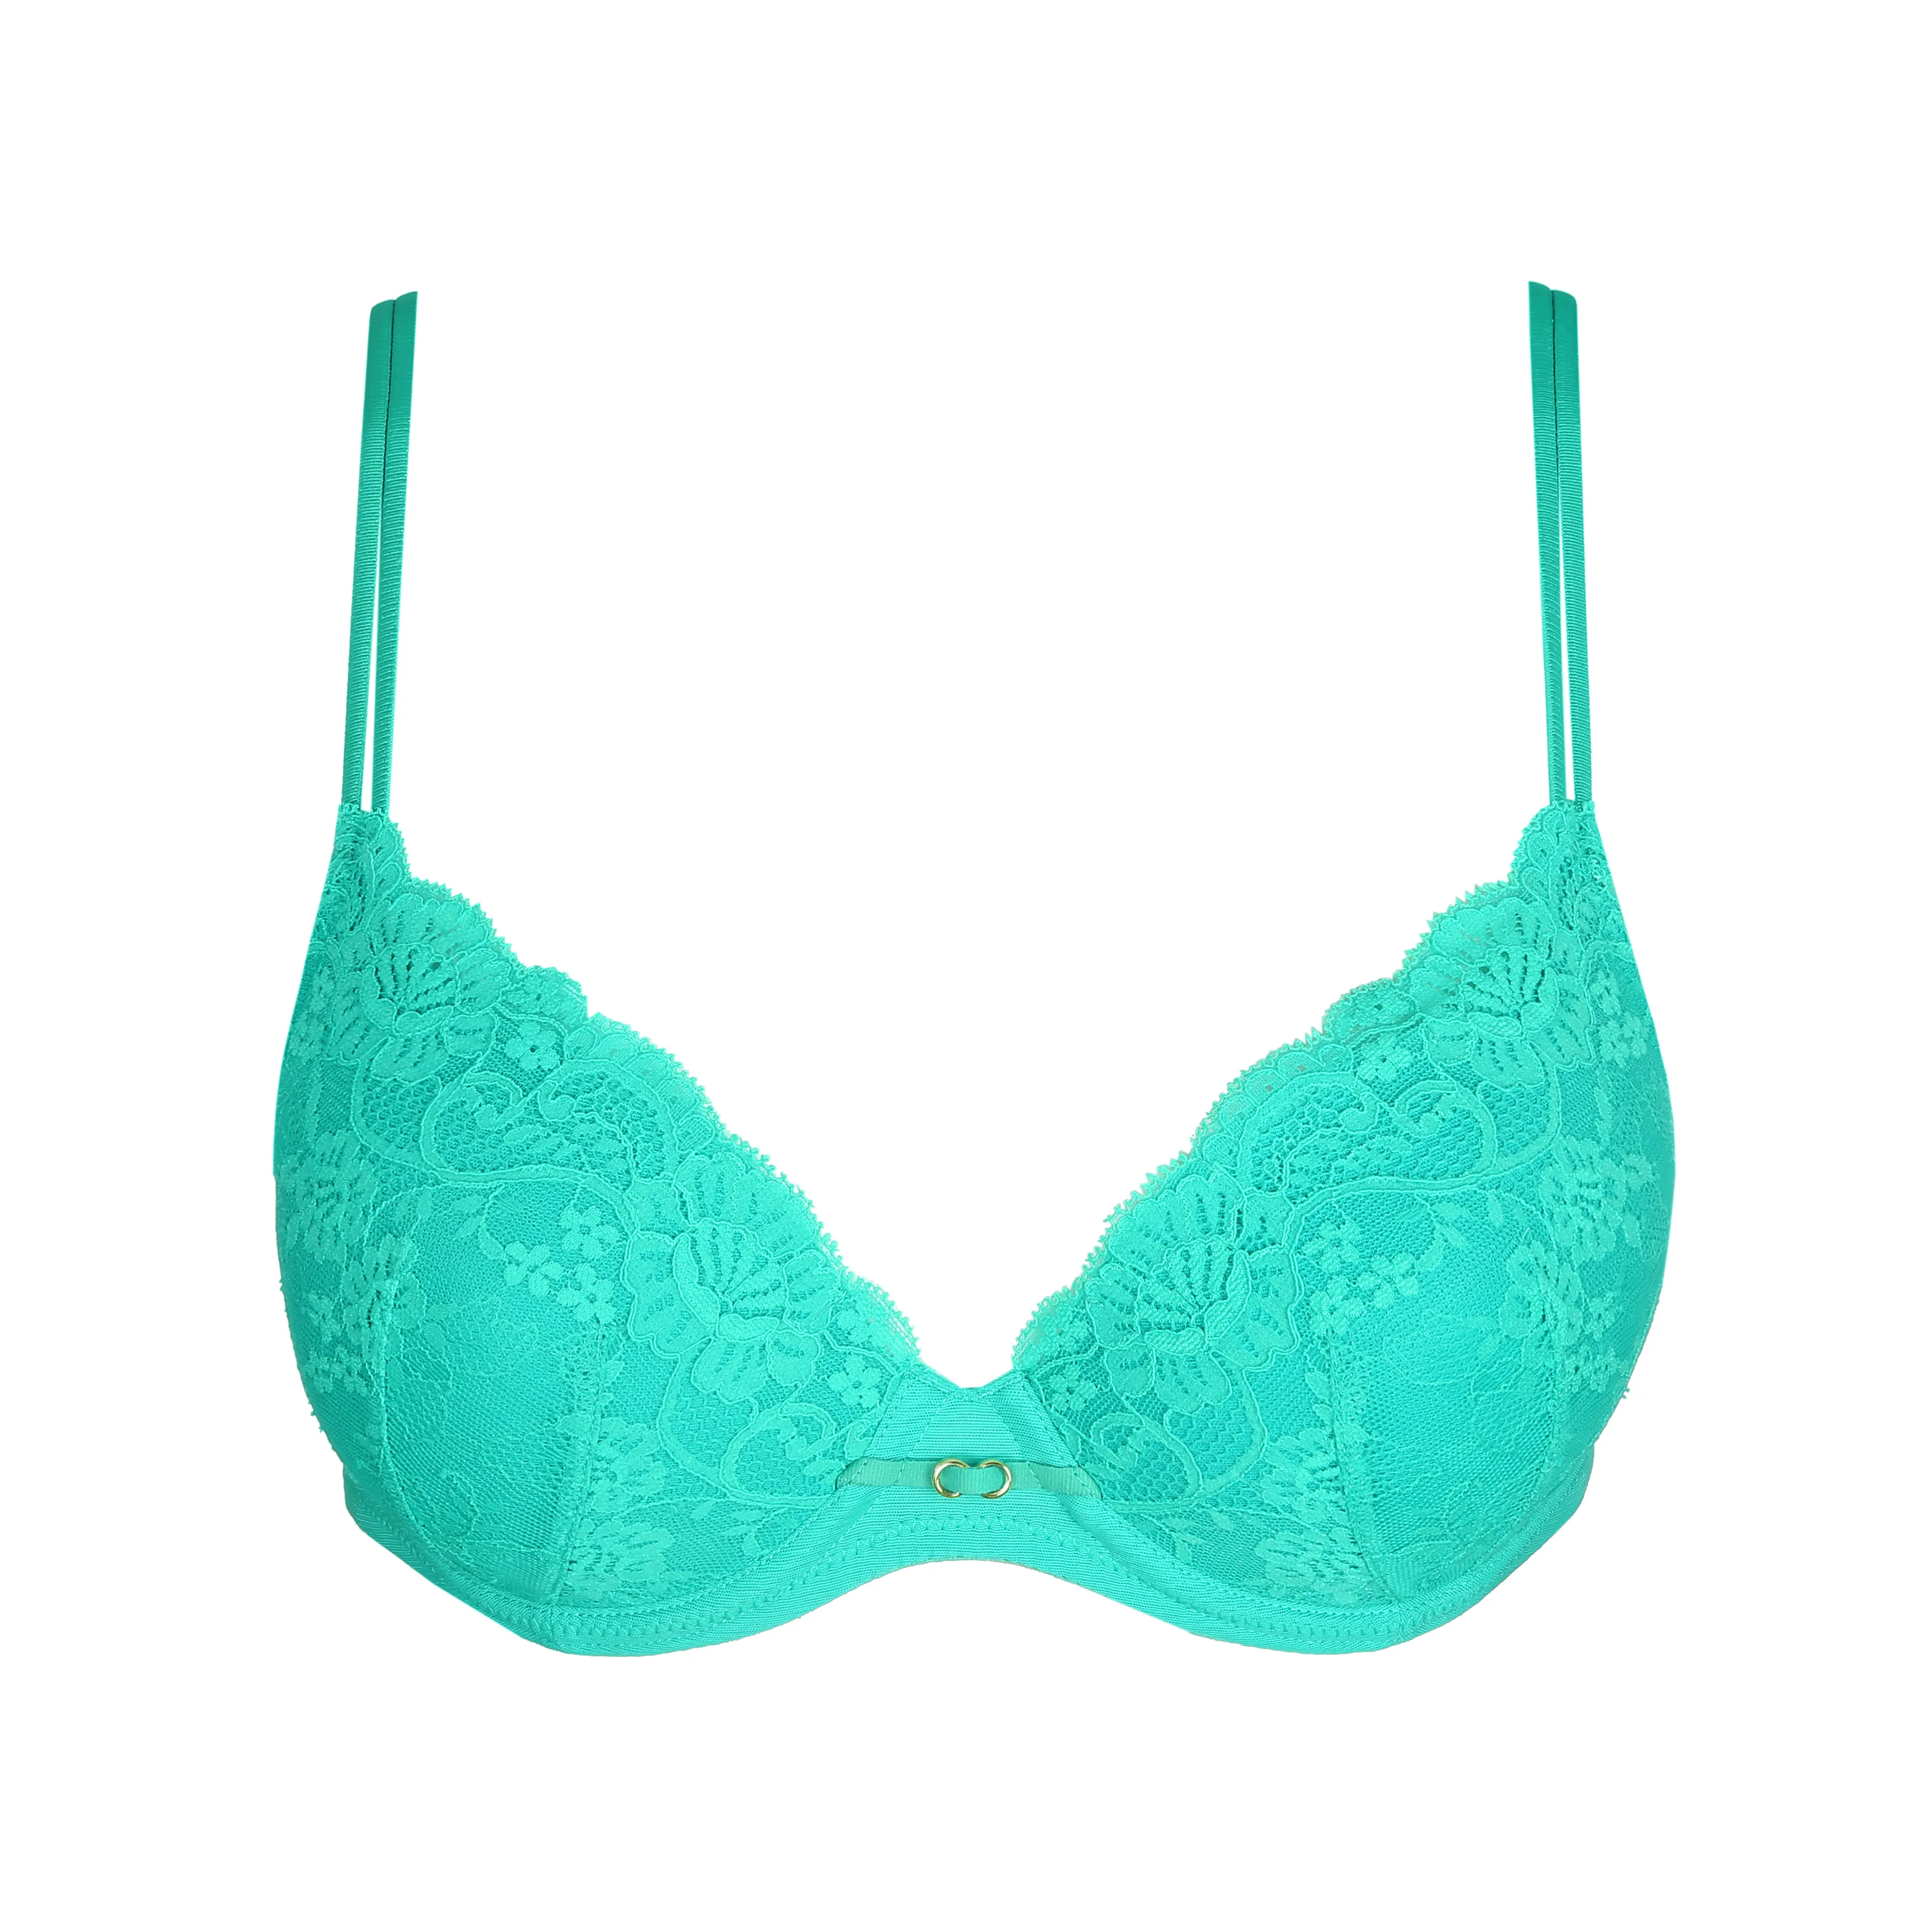 70A - H&m » Our Perfect Push-up Bra